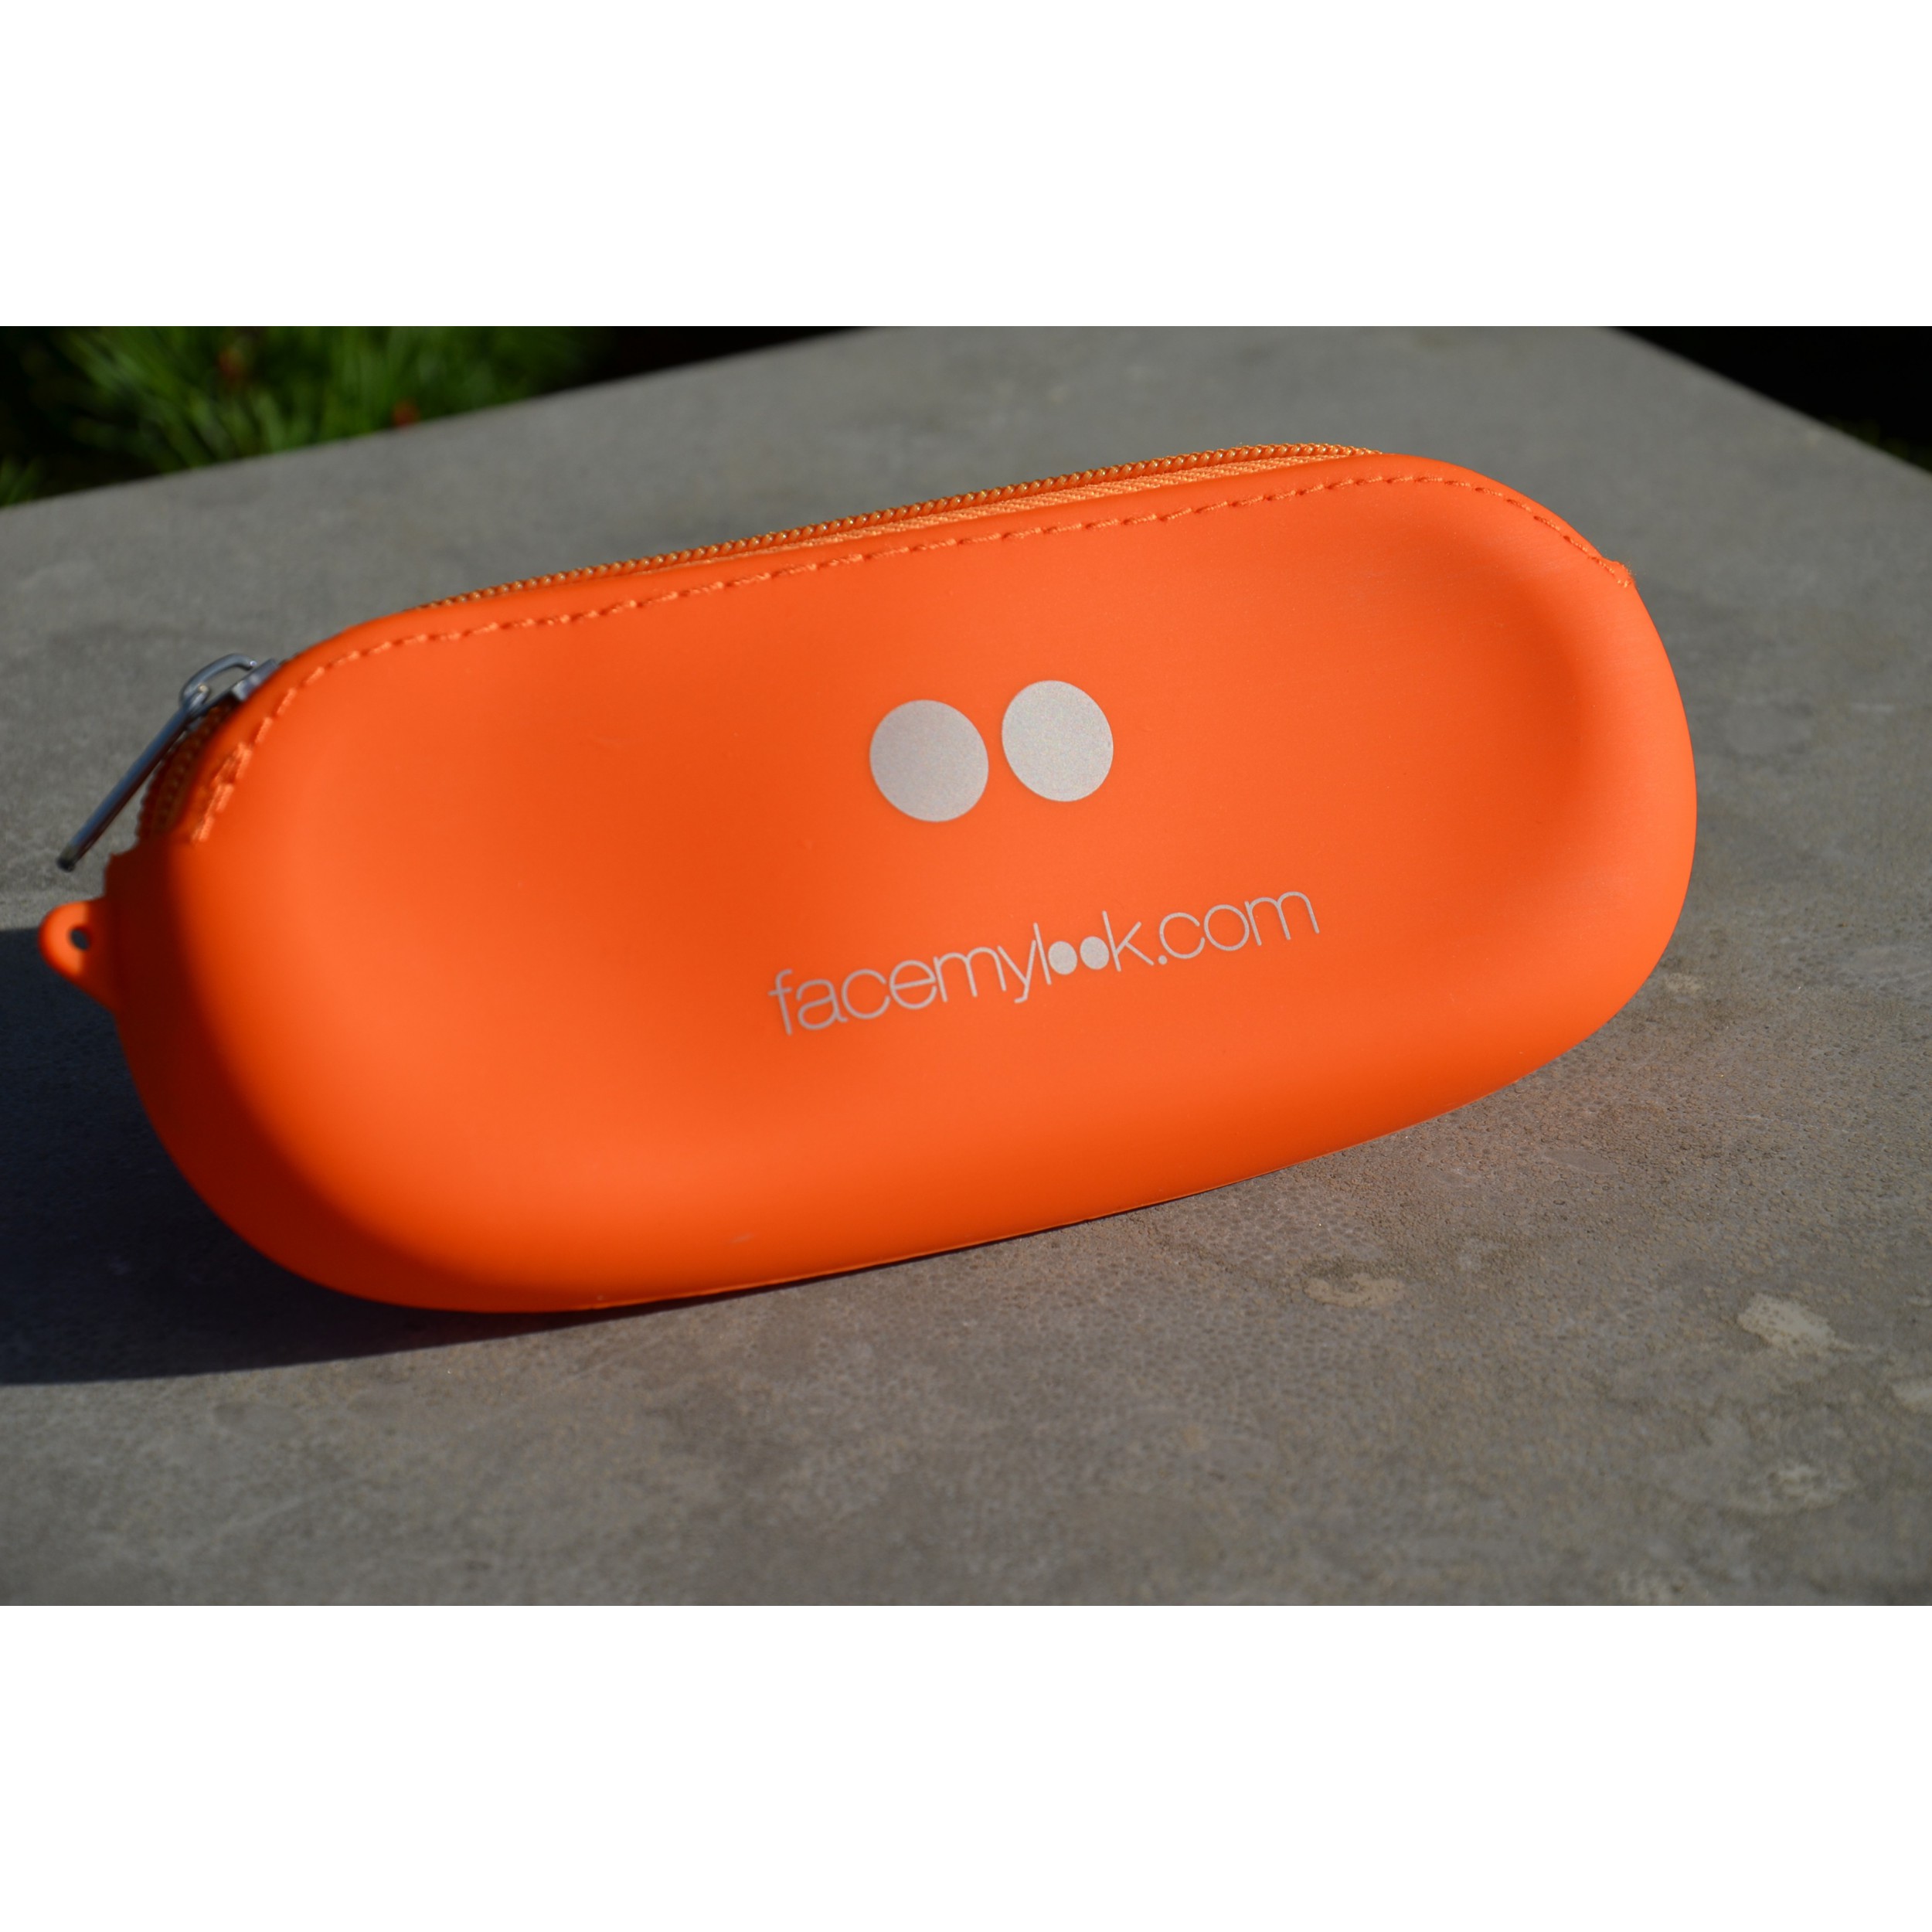 Facemylook  Orange silicone holder sunglasses - Category Accessories